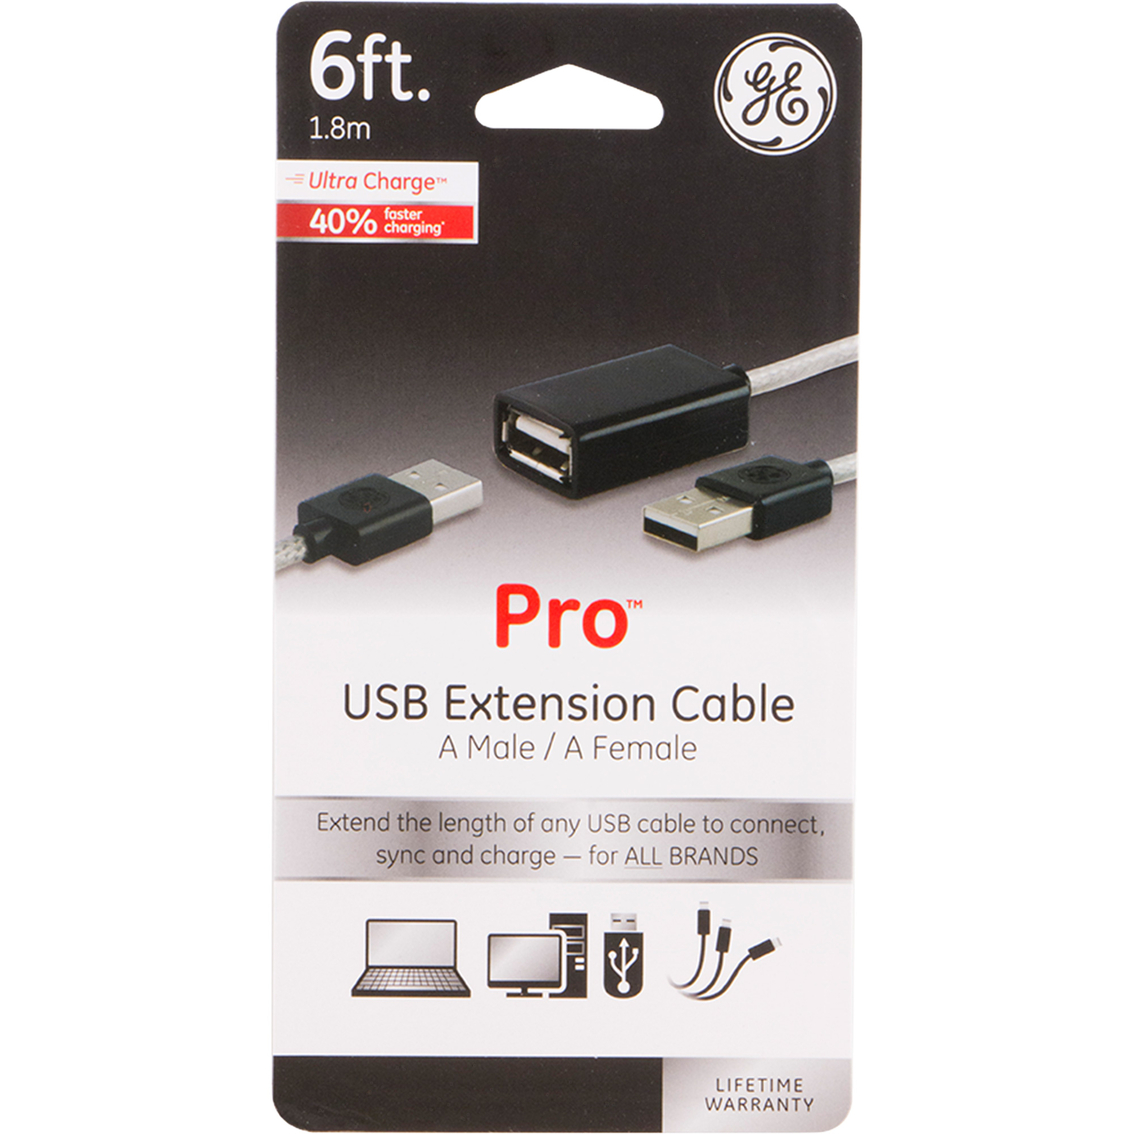 GE 6ft USB Extension Cable, Works with All Brands of USB-Enabled Devices,  Limited Lifetime Warranty, Black, 34505